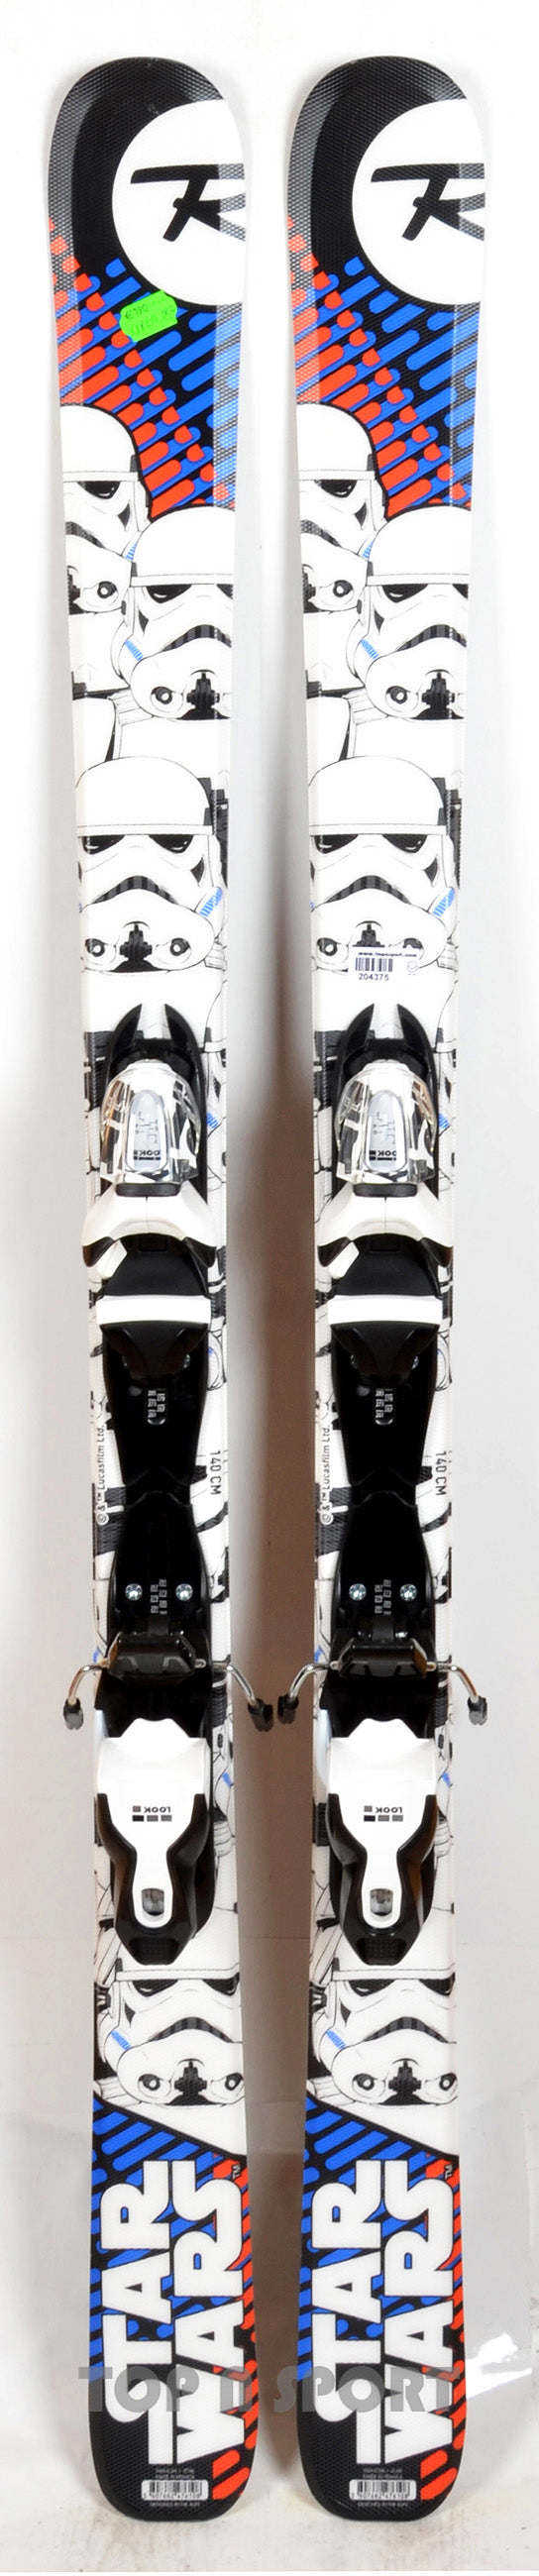 Pack neuf skis Rossignol STAR WARS avec fixations - neuf déstockage